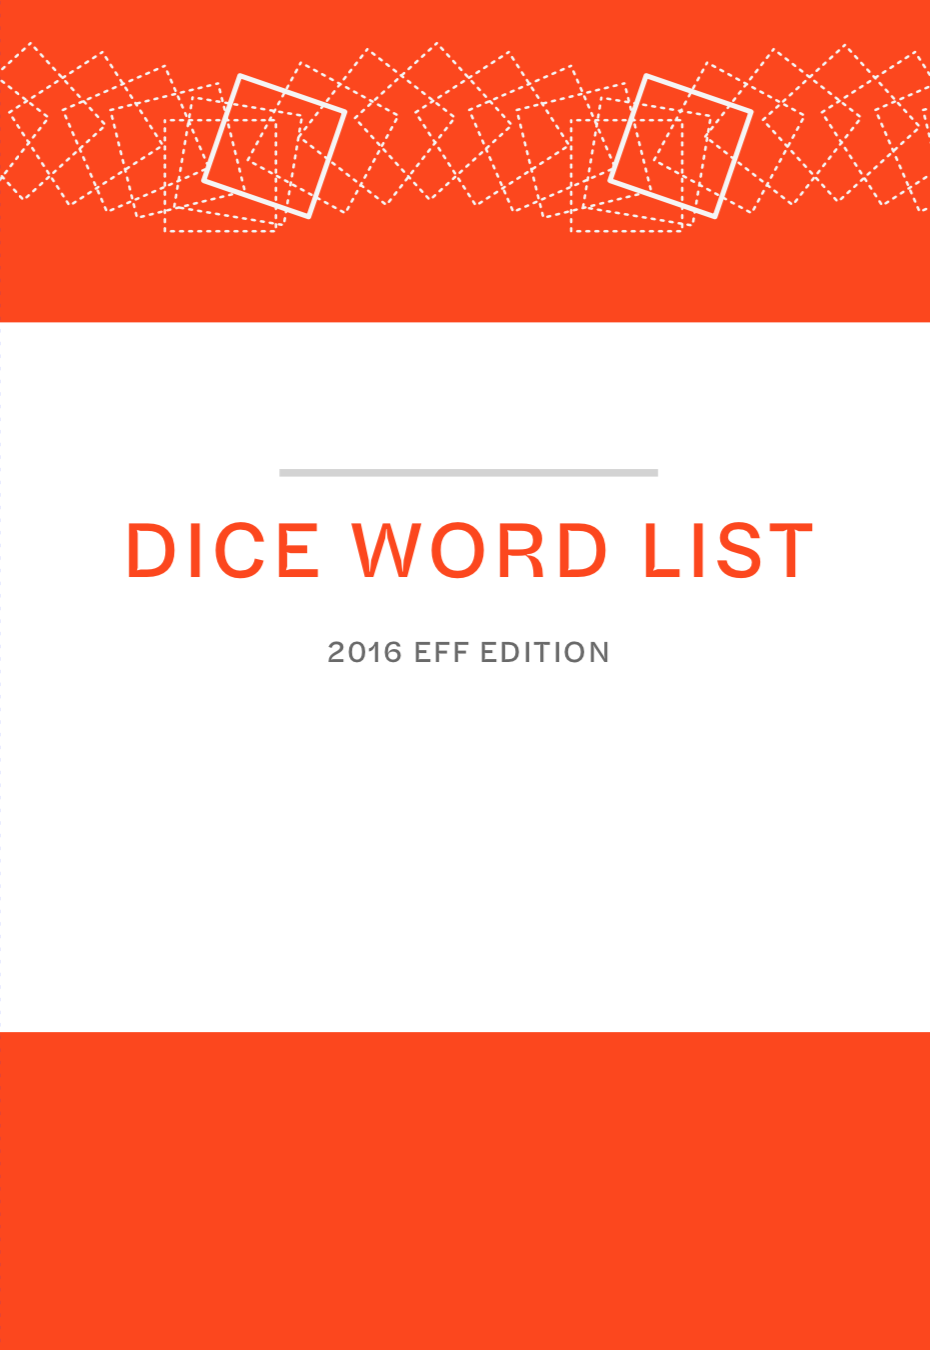 Dice Word List book cover